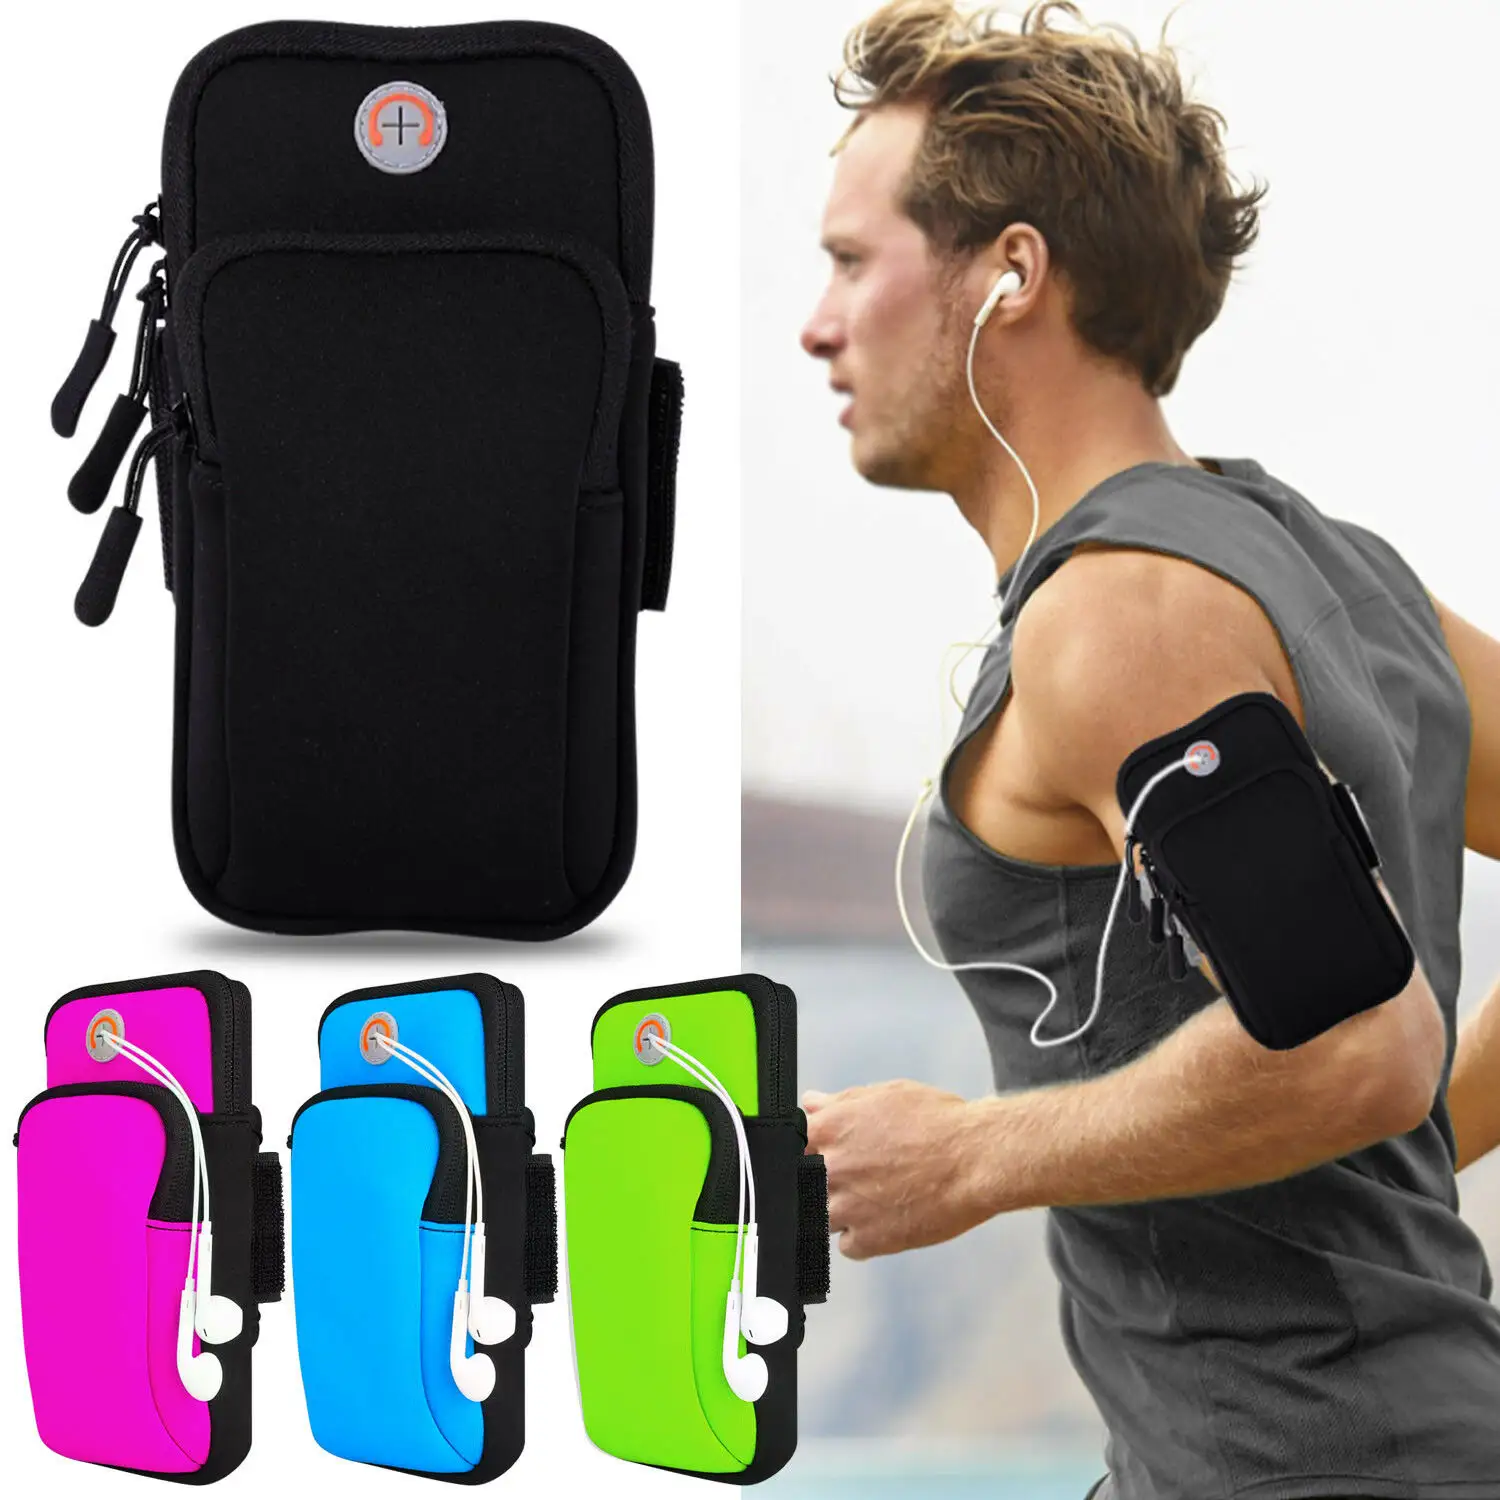 Sport Gym Lauf Jogging armband Arm Band Tasche Für <span class=keywords><strong>iPhone</strong></span> X/XR/XS Max/7/8 Plus